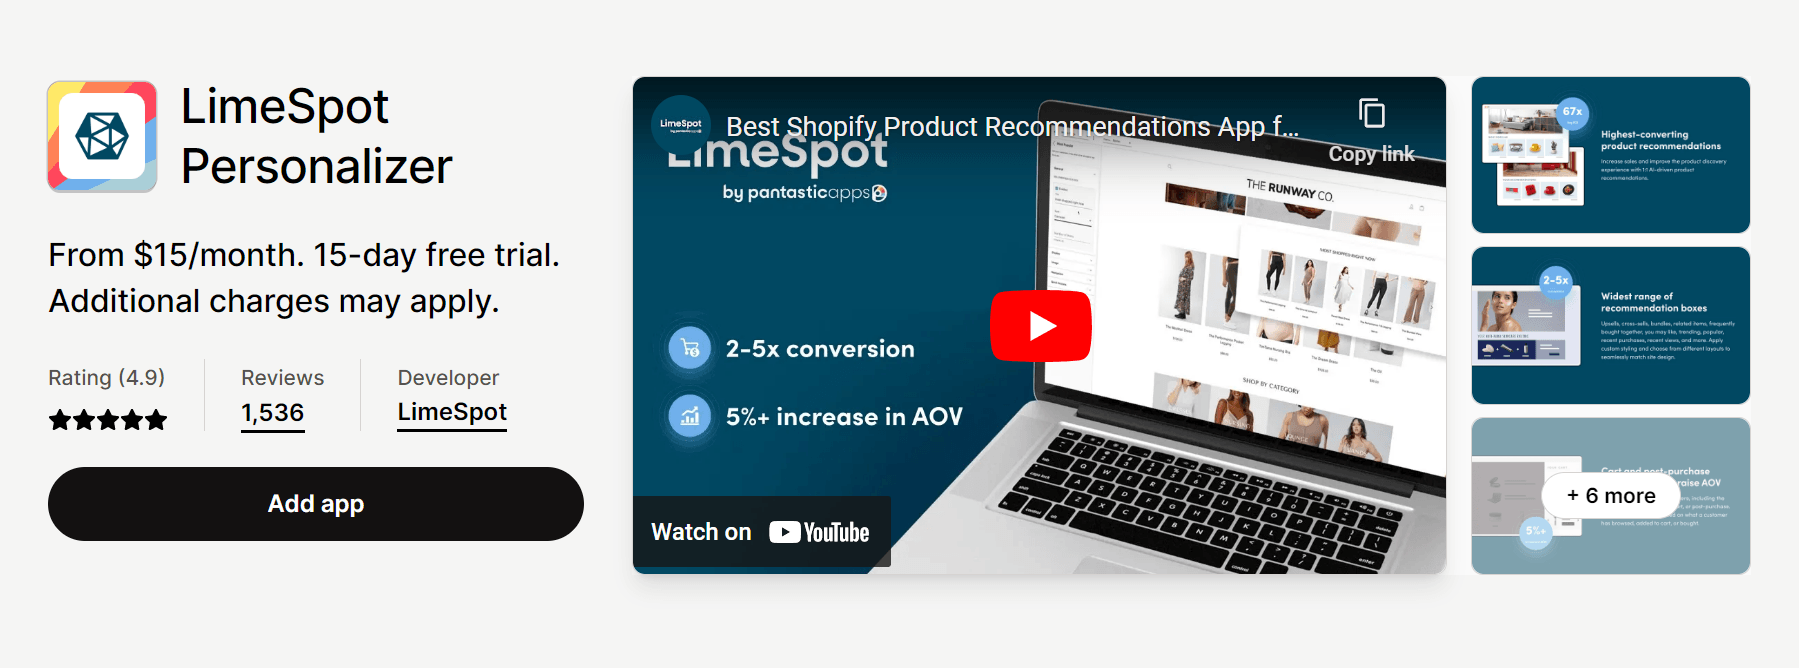 Limespot product recommendation app